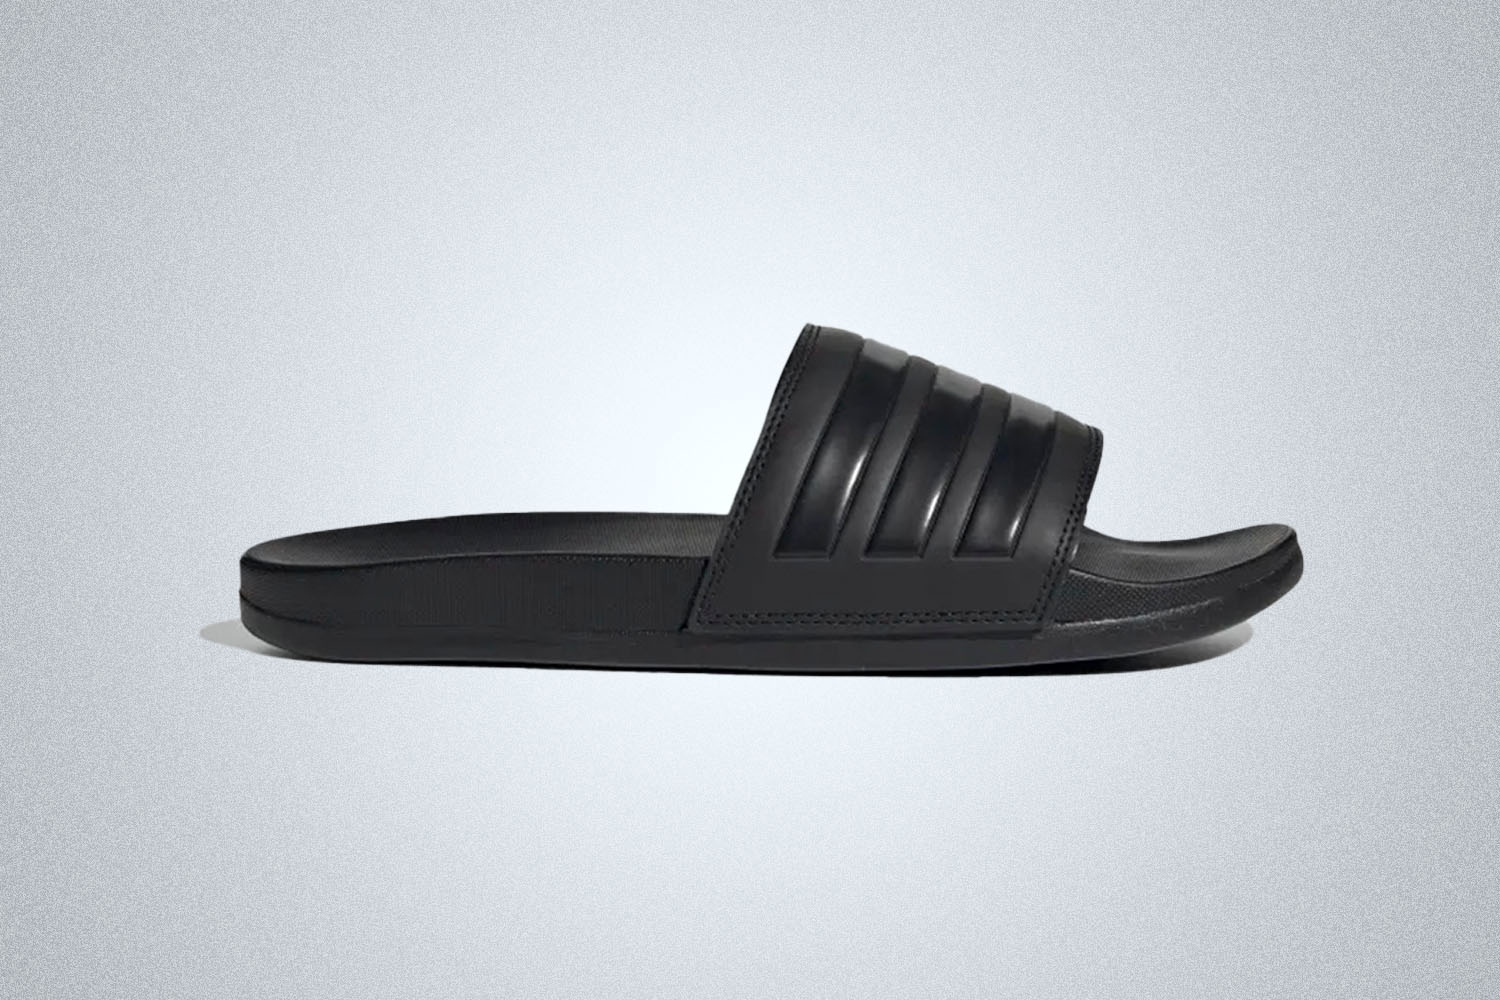 a pair of black adilette slides from Adidas on a grey background